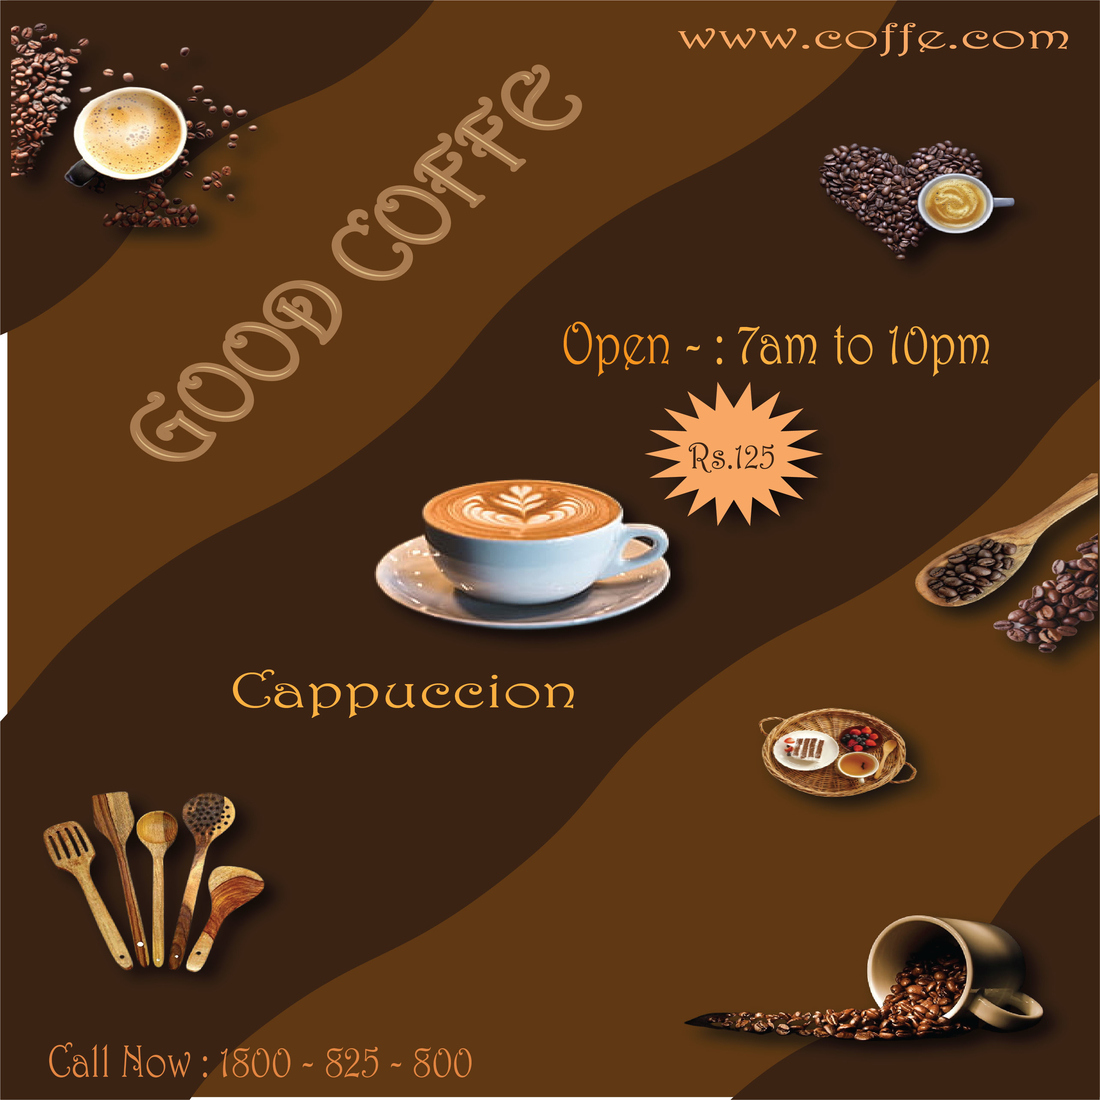 Coffee Poster Design cover image.